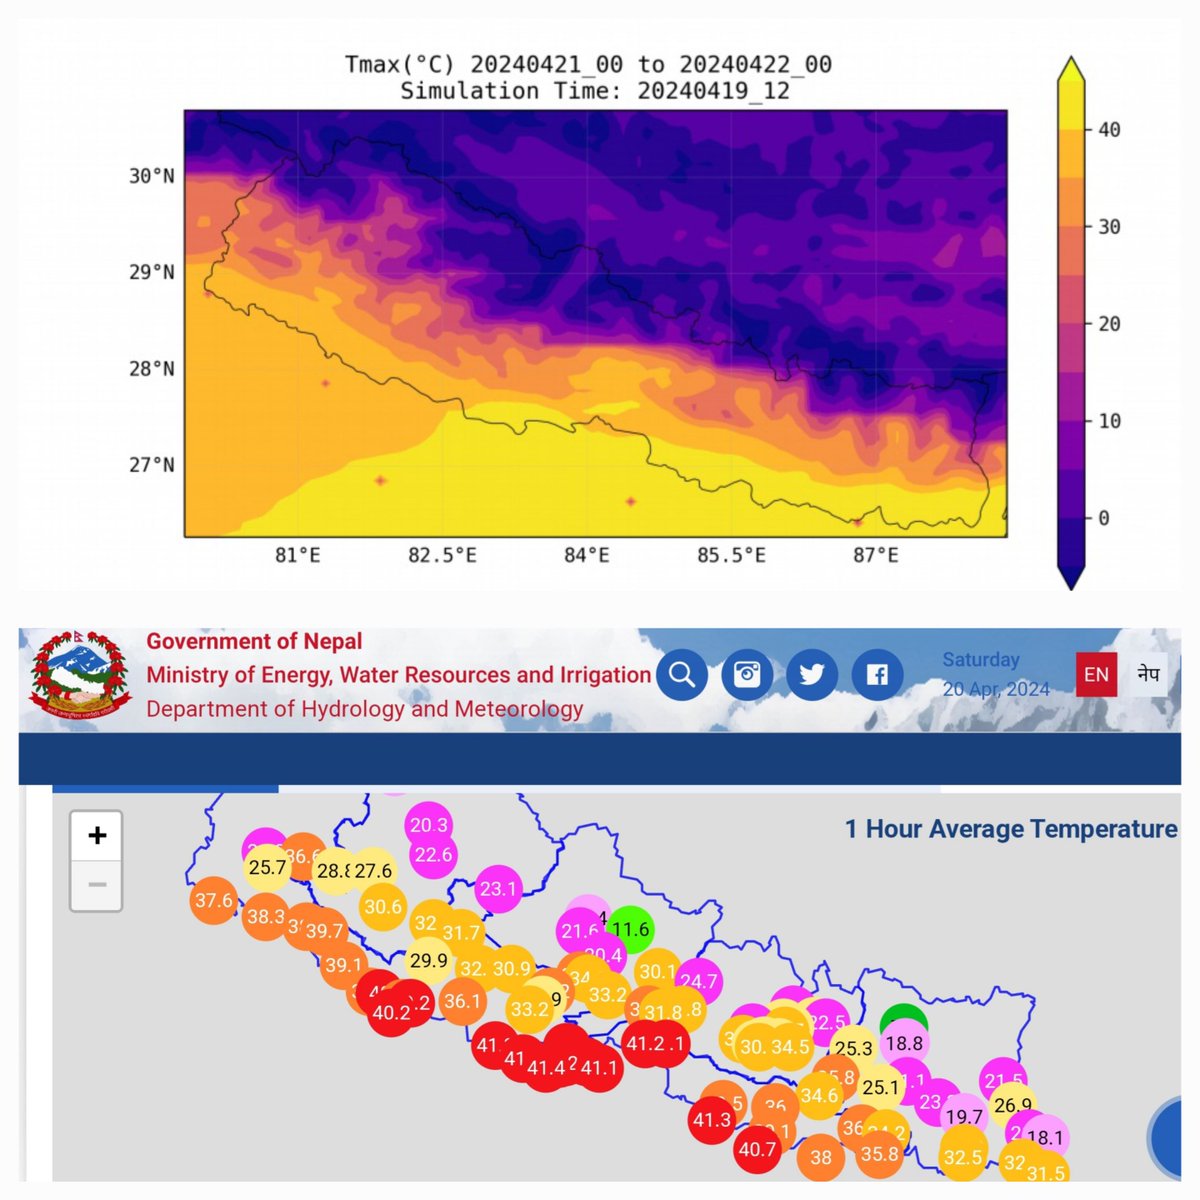 Heatwave is expected in isolated parts of Terai region. maximum hourly temperature exceeding 40 degree in many districts today. #RIMES generated forecast showing, it will continue in next 2-3 days. @NDRRMA_Nepal @anil